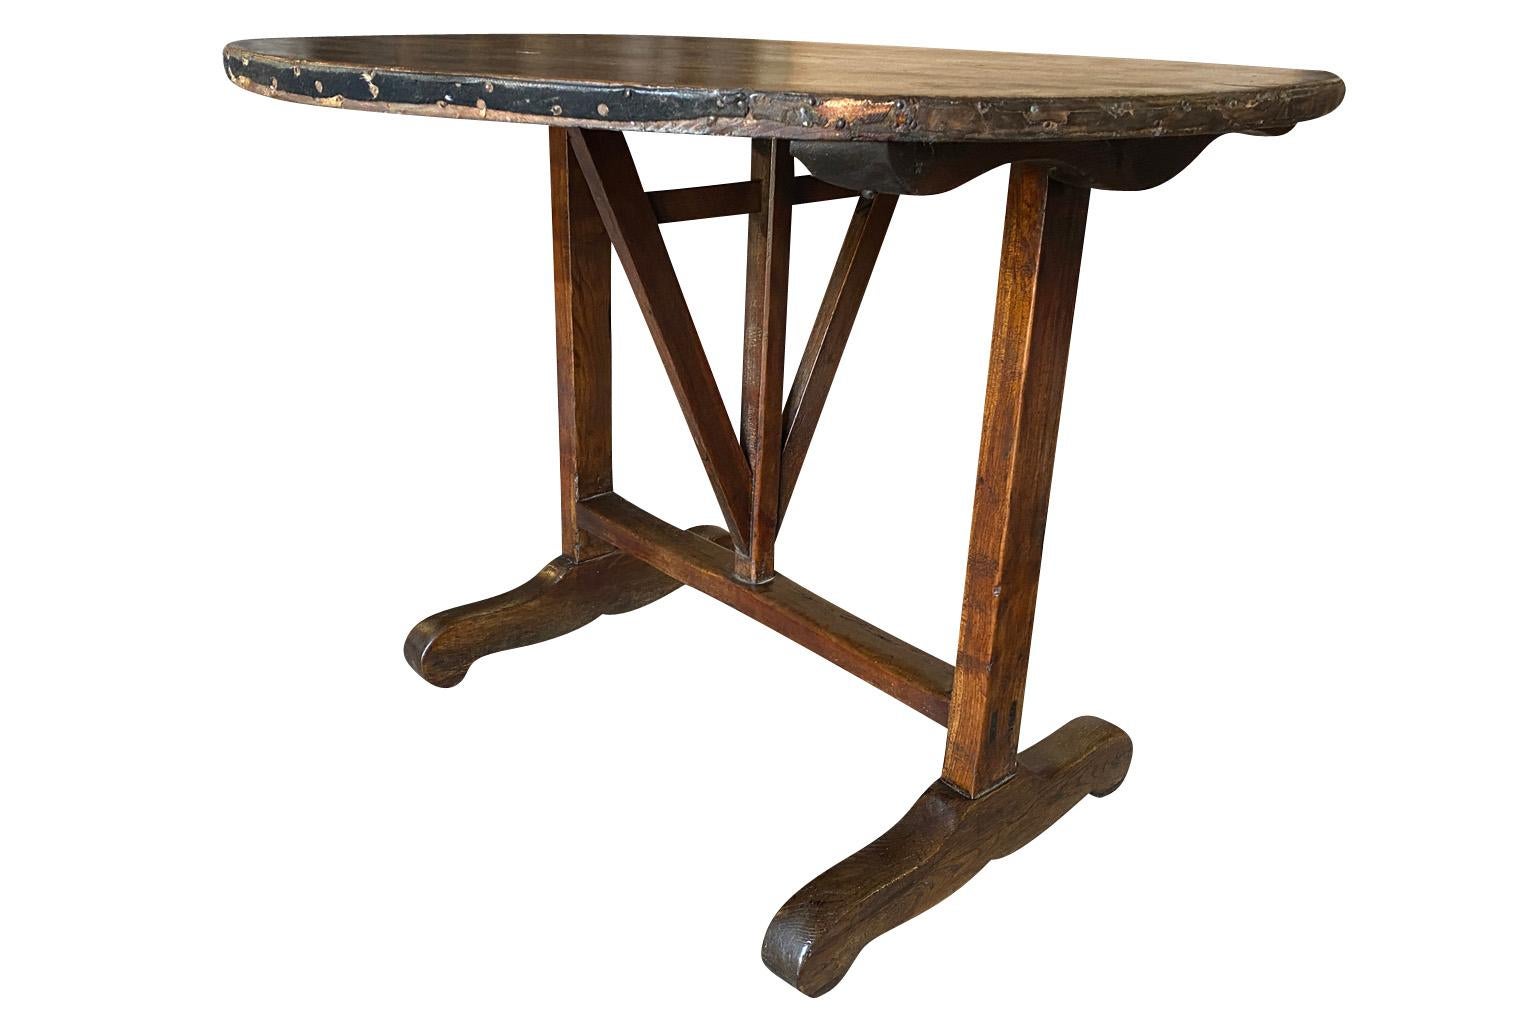 A very charming mid-19th century Table Vigneron - Wine Tasting Table from Beaune, France.  Beautifully constructed from richly stained oak with a tilting top, charming scalloped braces under the top and a handsome moleskin top.  Fabulous patina.